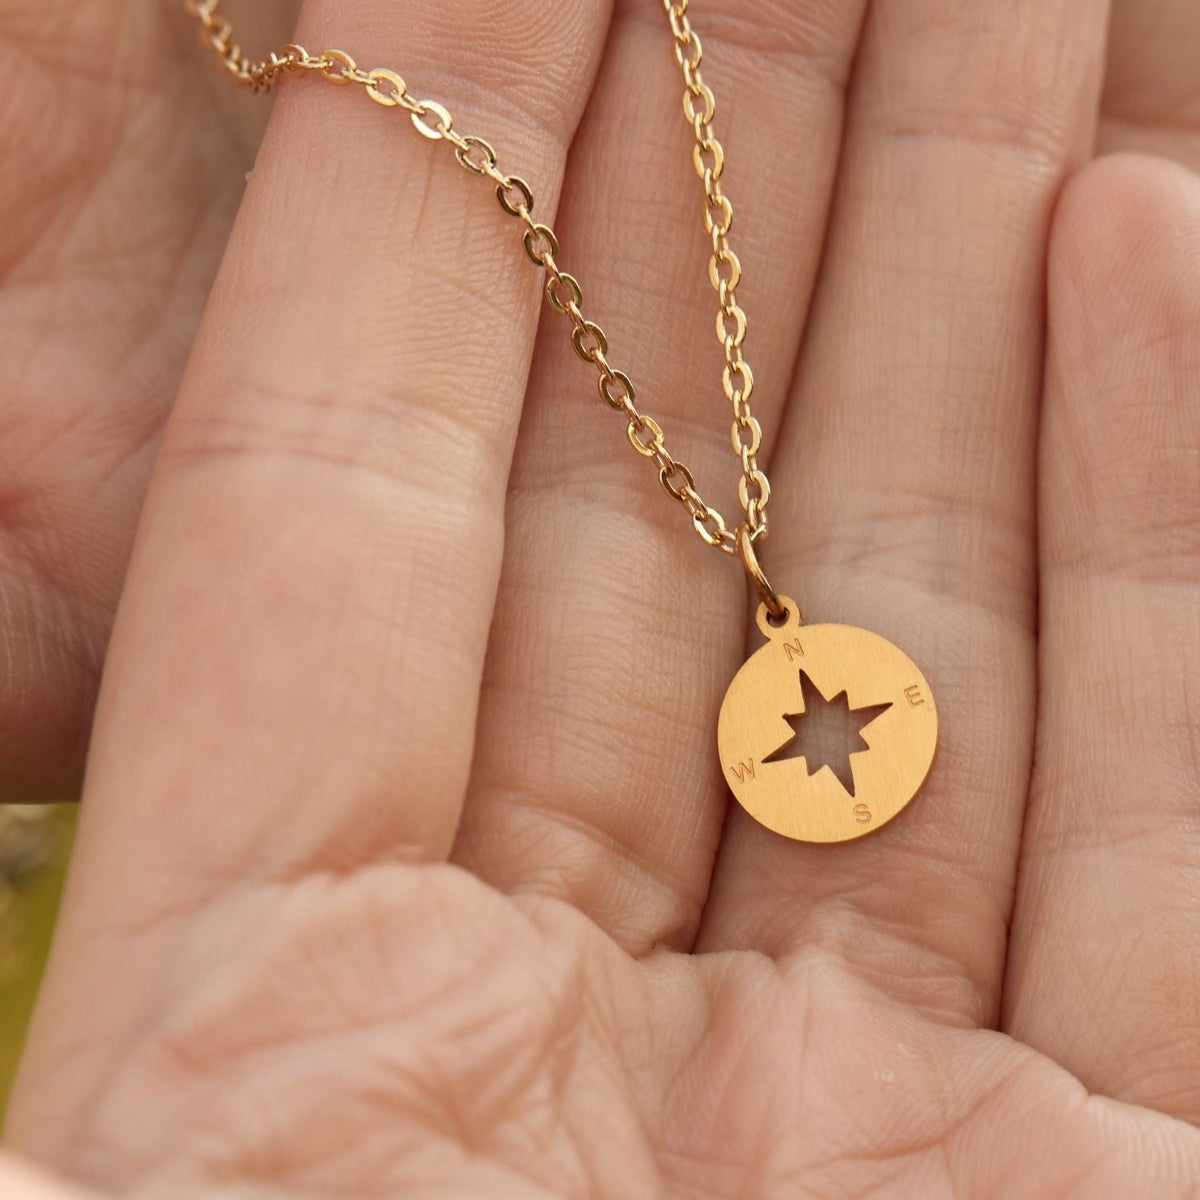 To My Beautiful Daughter | Reasons to Thank God | Compass Necklace